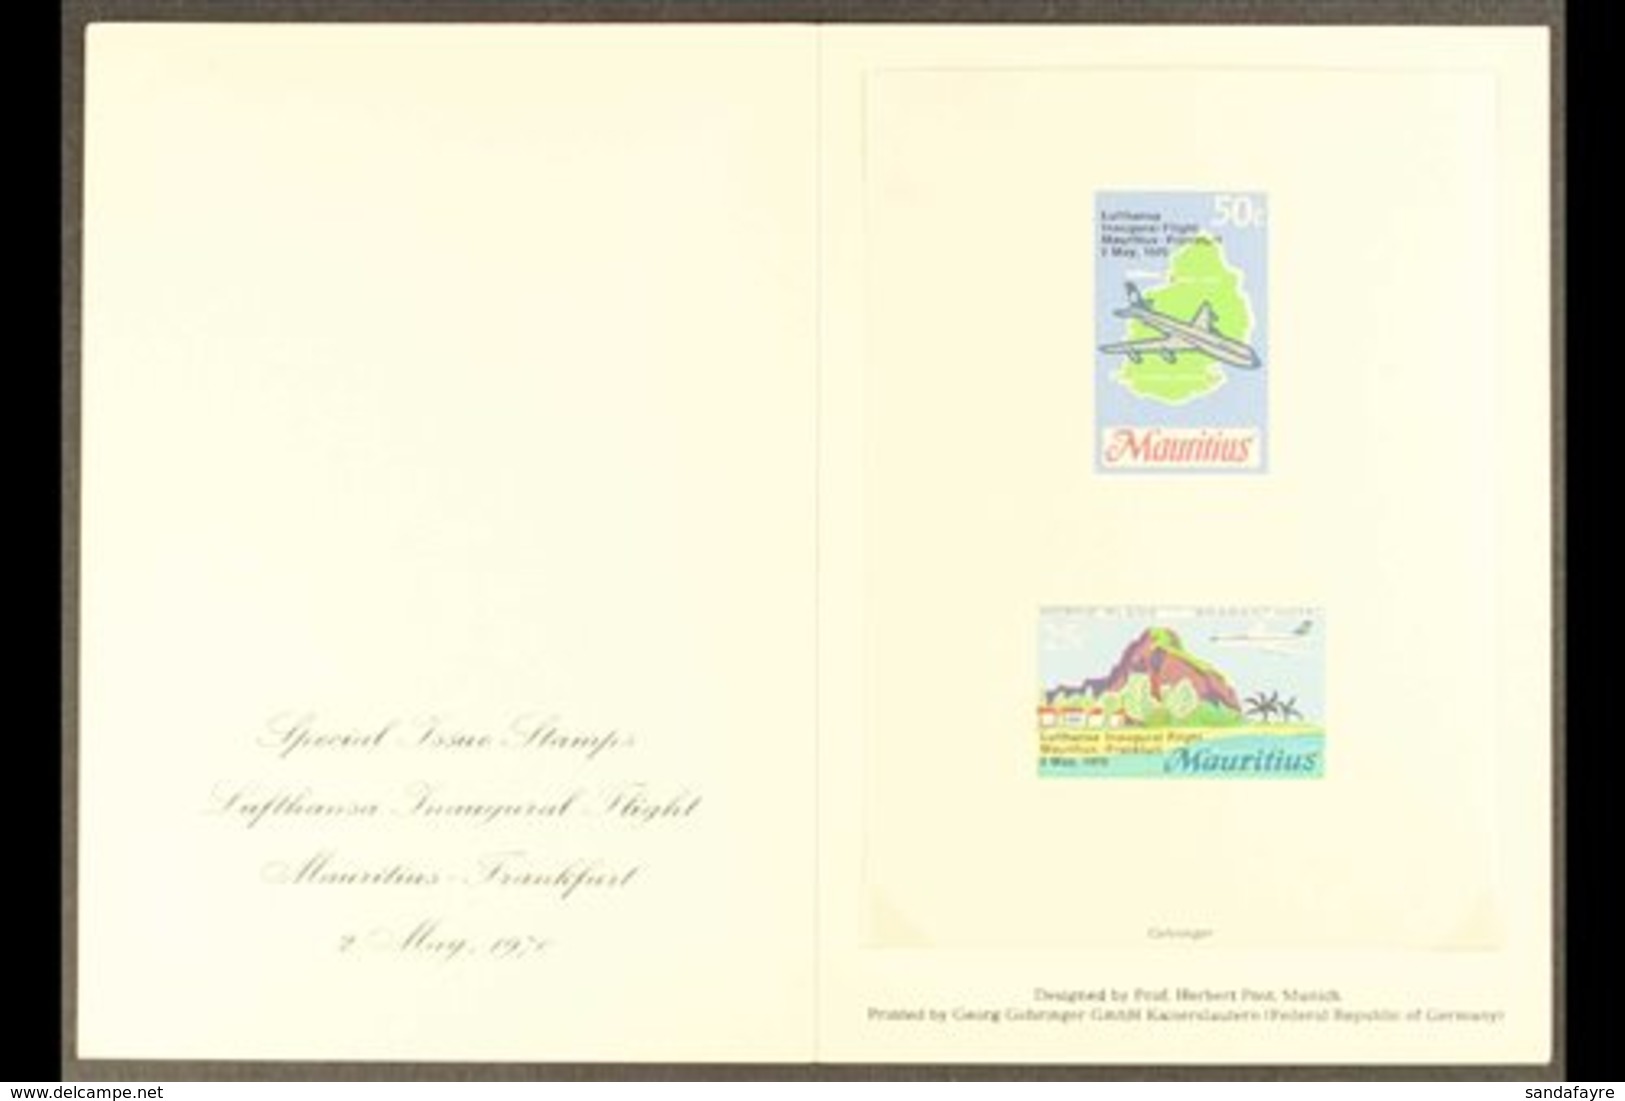 1970 Inauguration Of Lufthansa Flight COMPOSITE IMPERF DIE PROOF (SG 415/16) Printed On Gummed Paper, Never Hinged Mint, - Mauritius (...-1967)